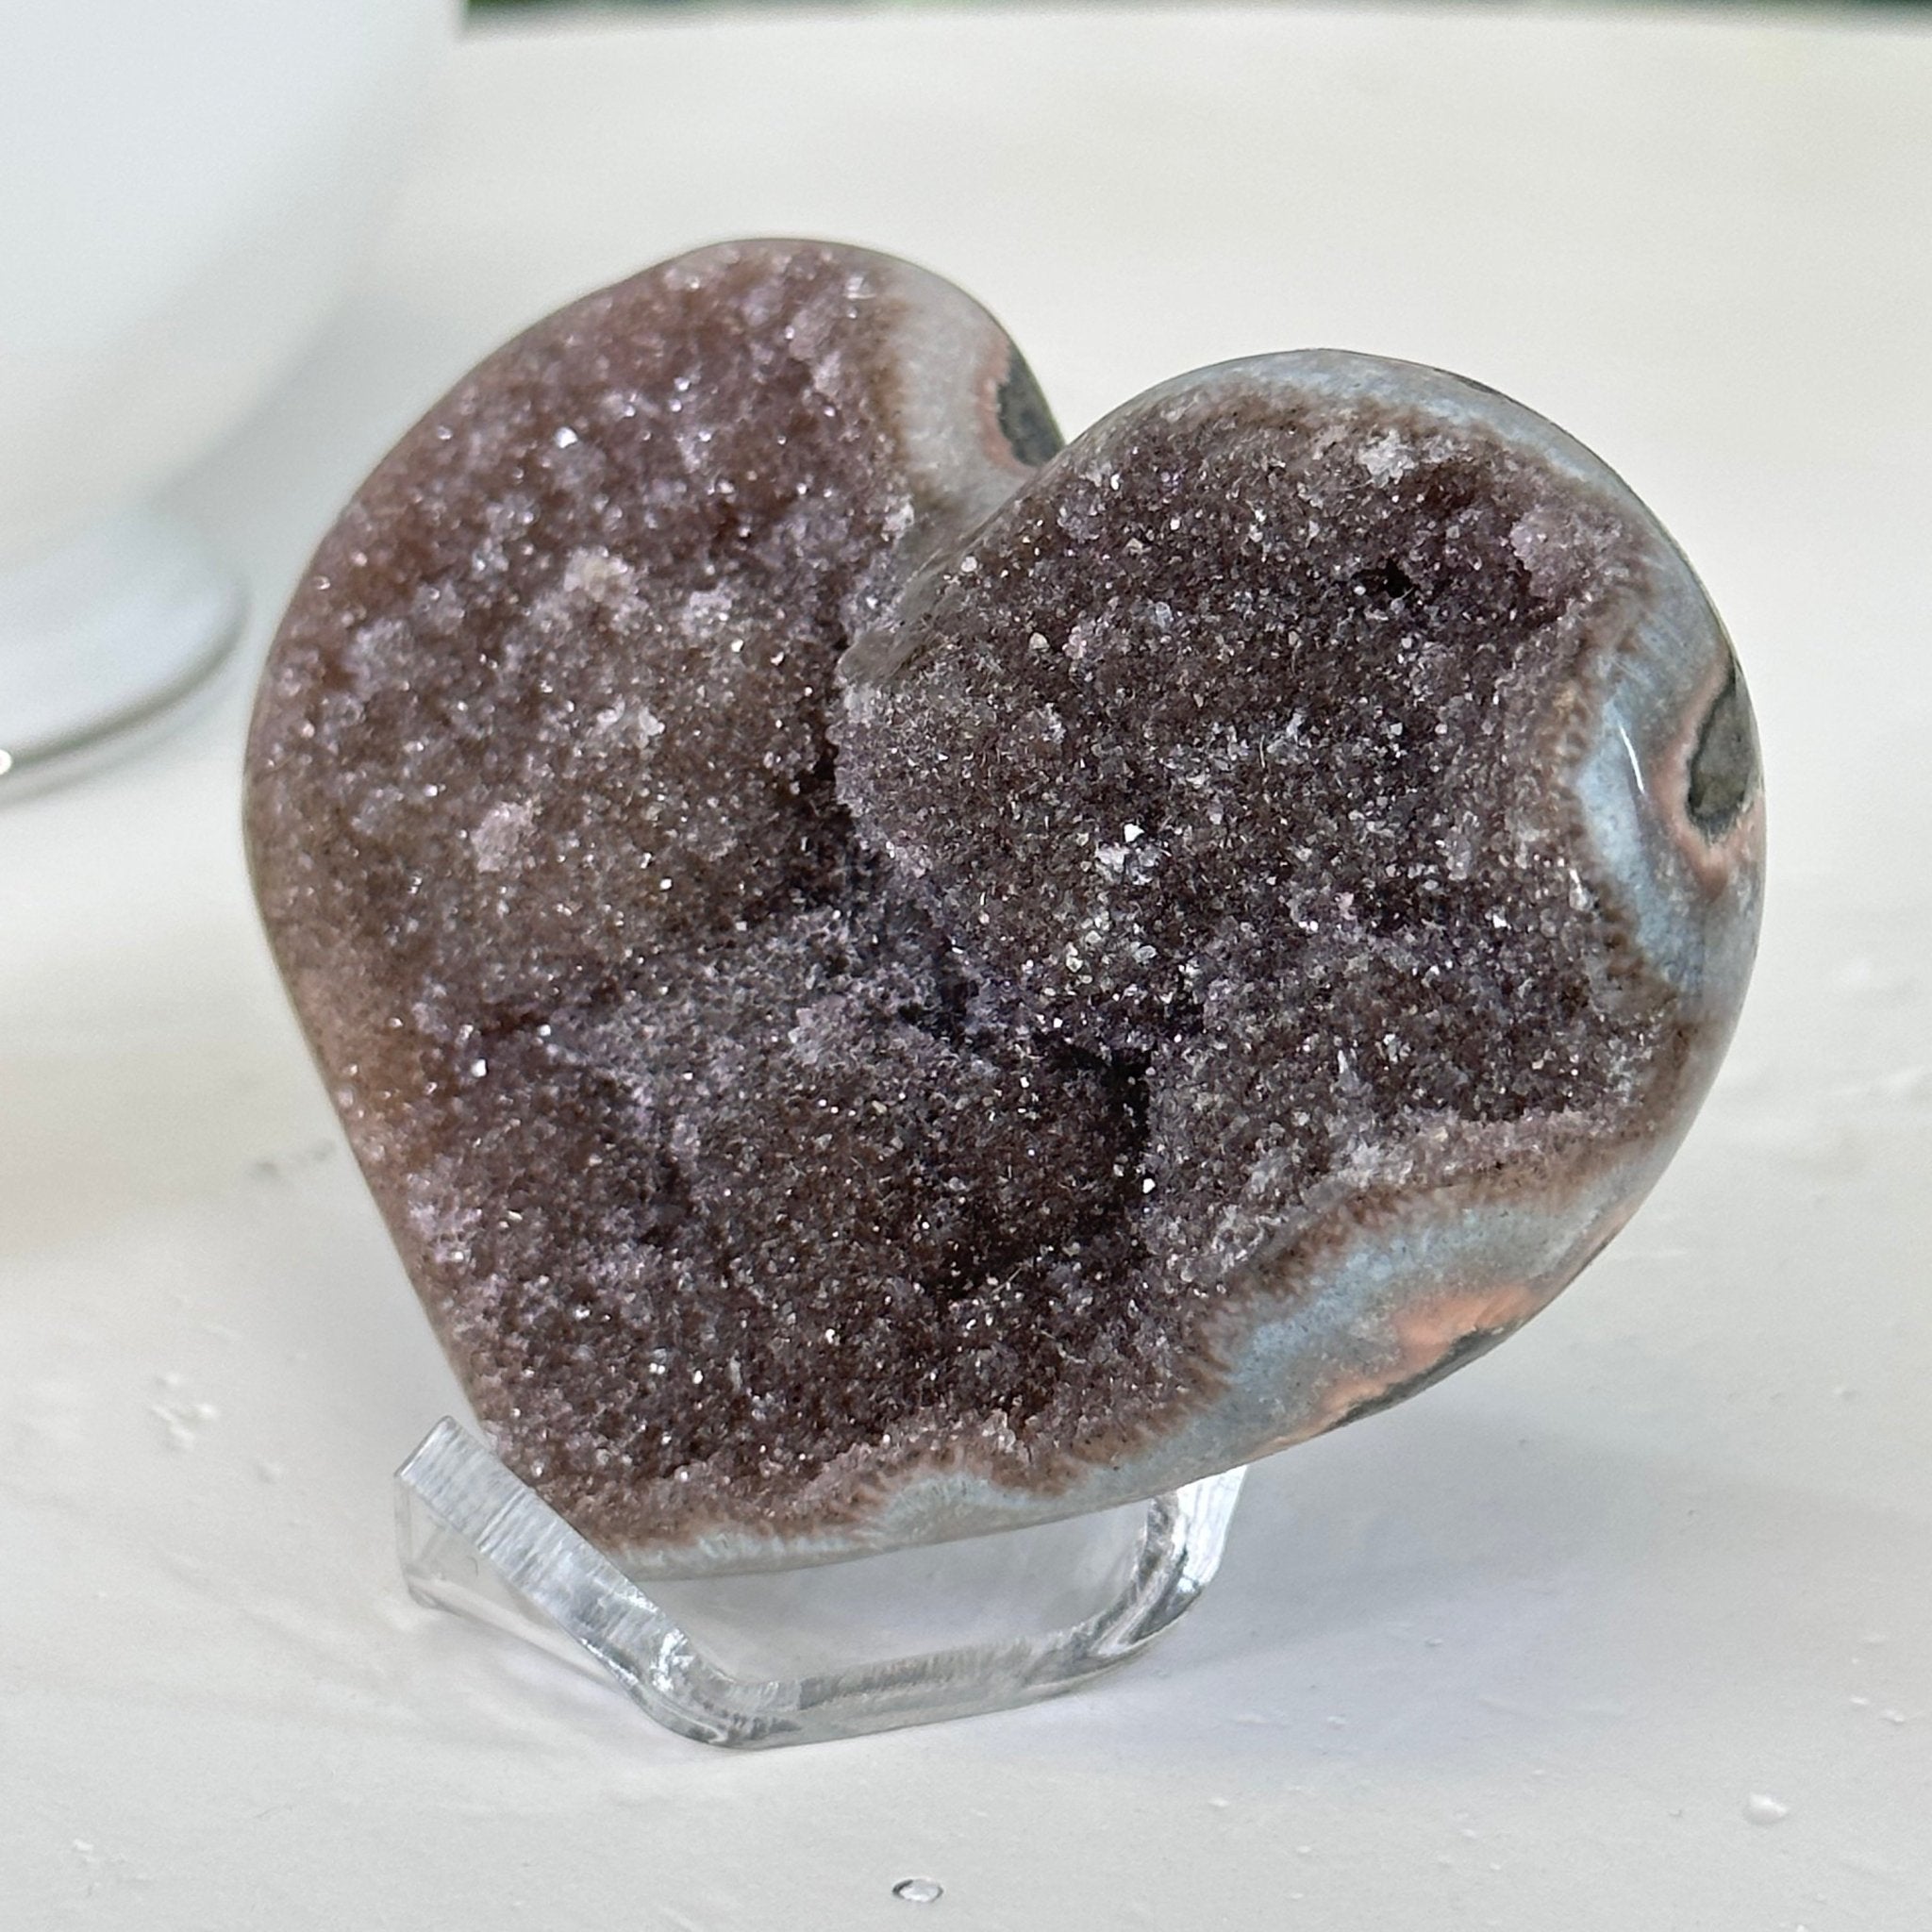 Extra Quality Amethyst Heart Geode on an Acrylic Stand, 0.16 lbs & 1.8" Tall #5462-0072 by Brazil Gems - Brazil GemsBrazil GemsExtra Quality Amethyst Heart Geode on an Acrylic Stand, 0.16 lbs & 1.8" Tall #5462-0072 by Brazil GemsHearts5462-0072